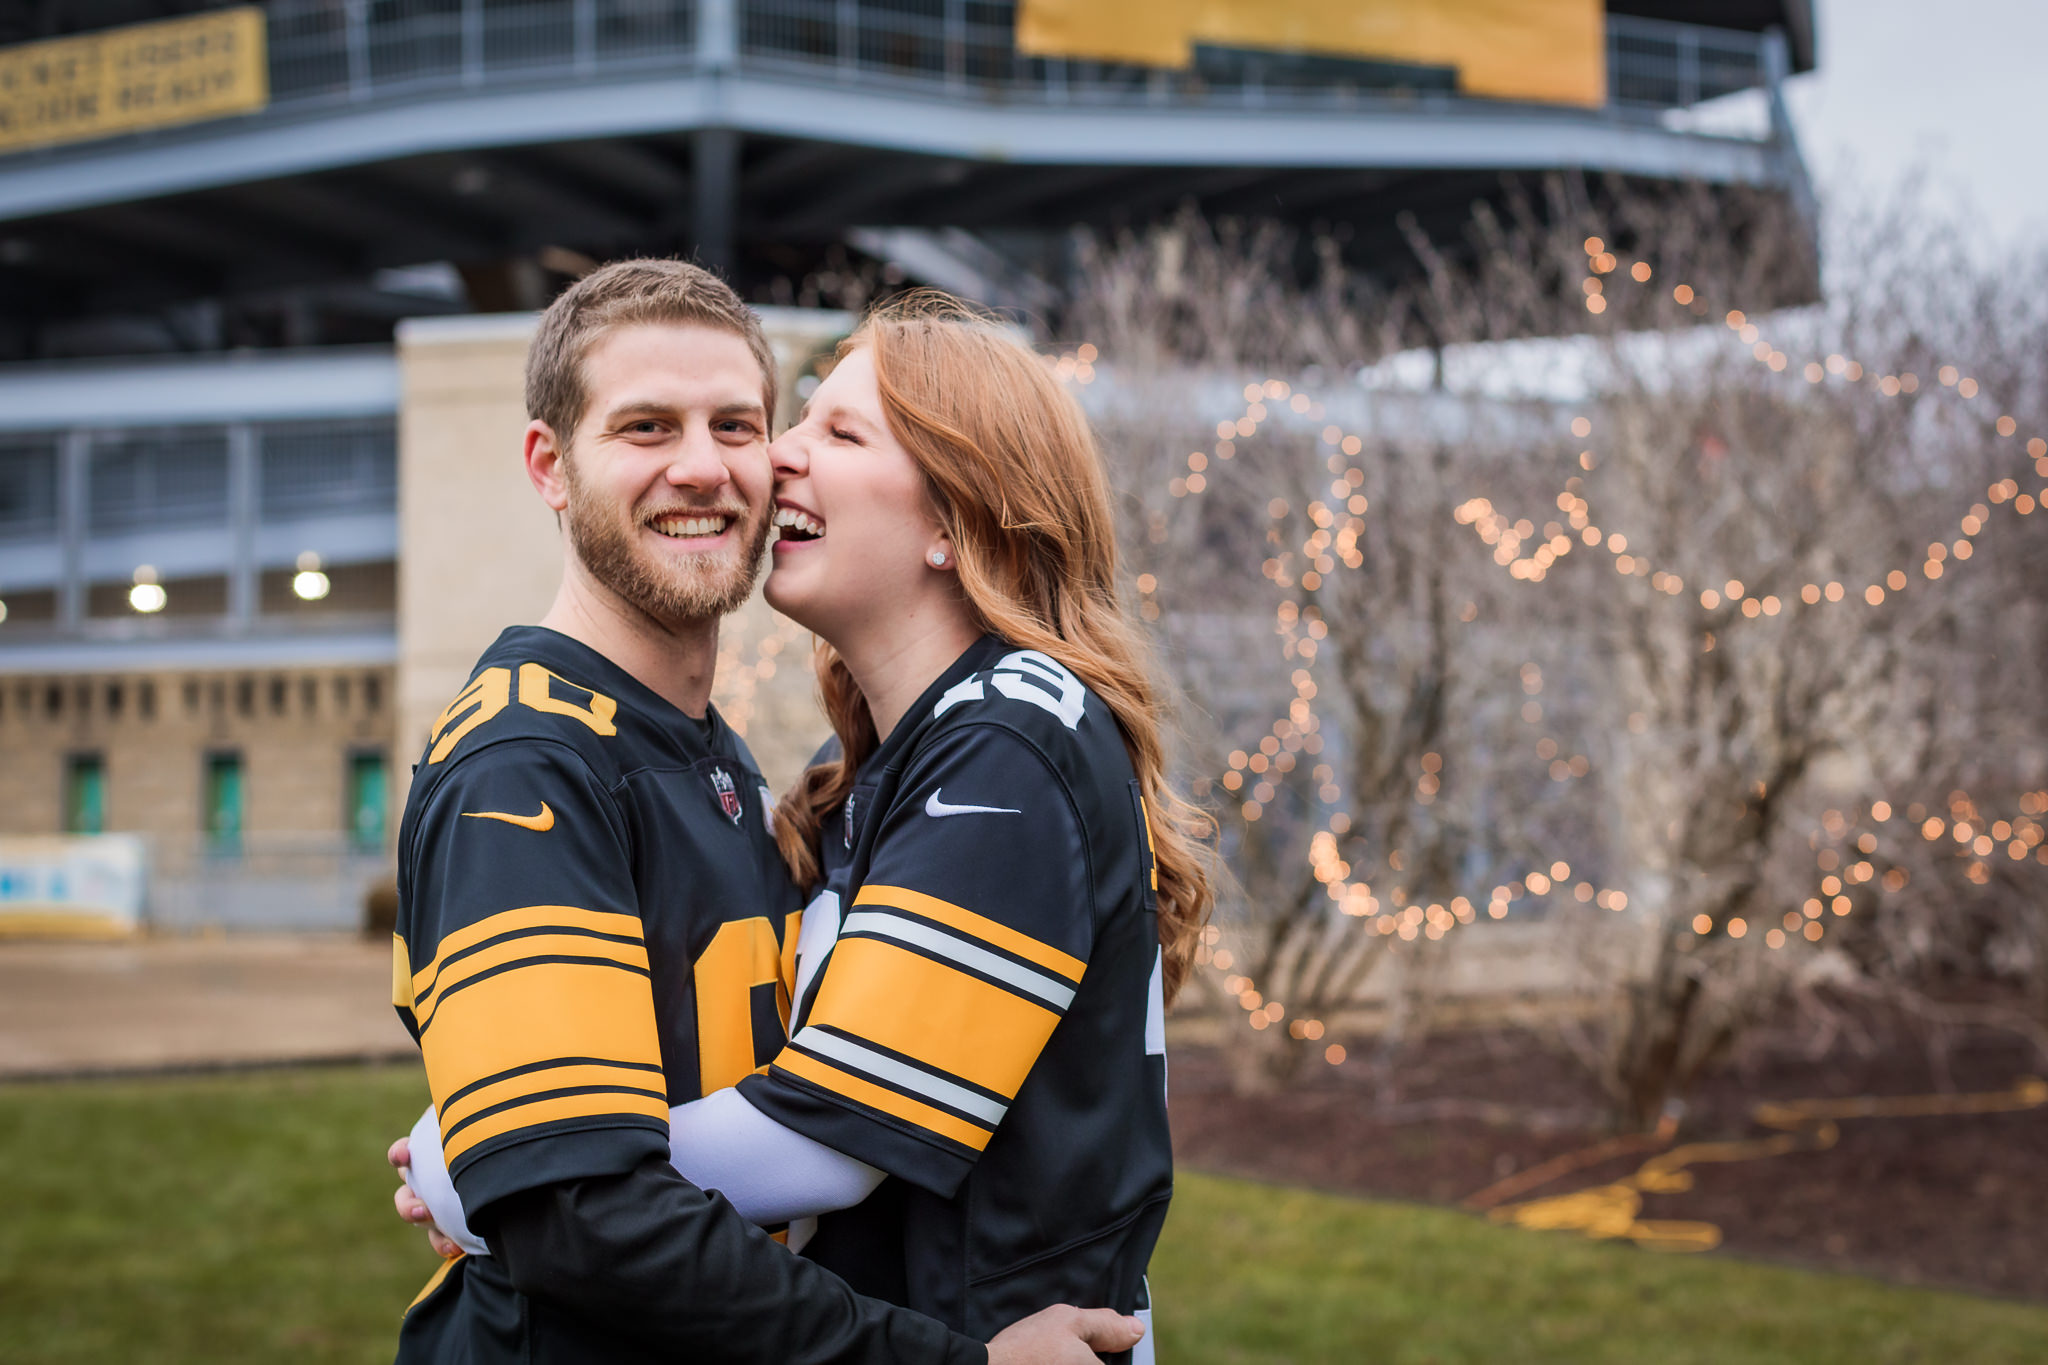 Couple laughs during Steelers engagement session at Heinz Field in Pittsburgh, PA